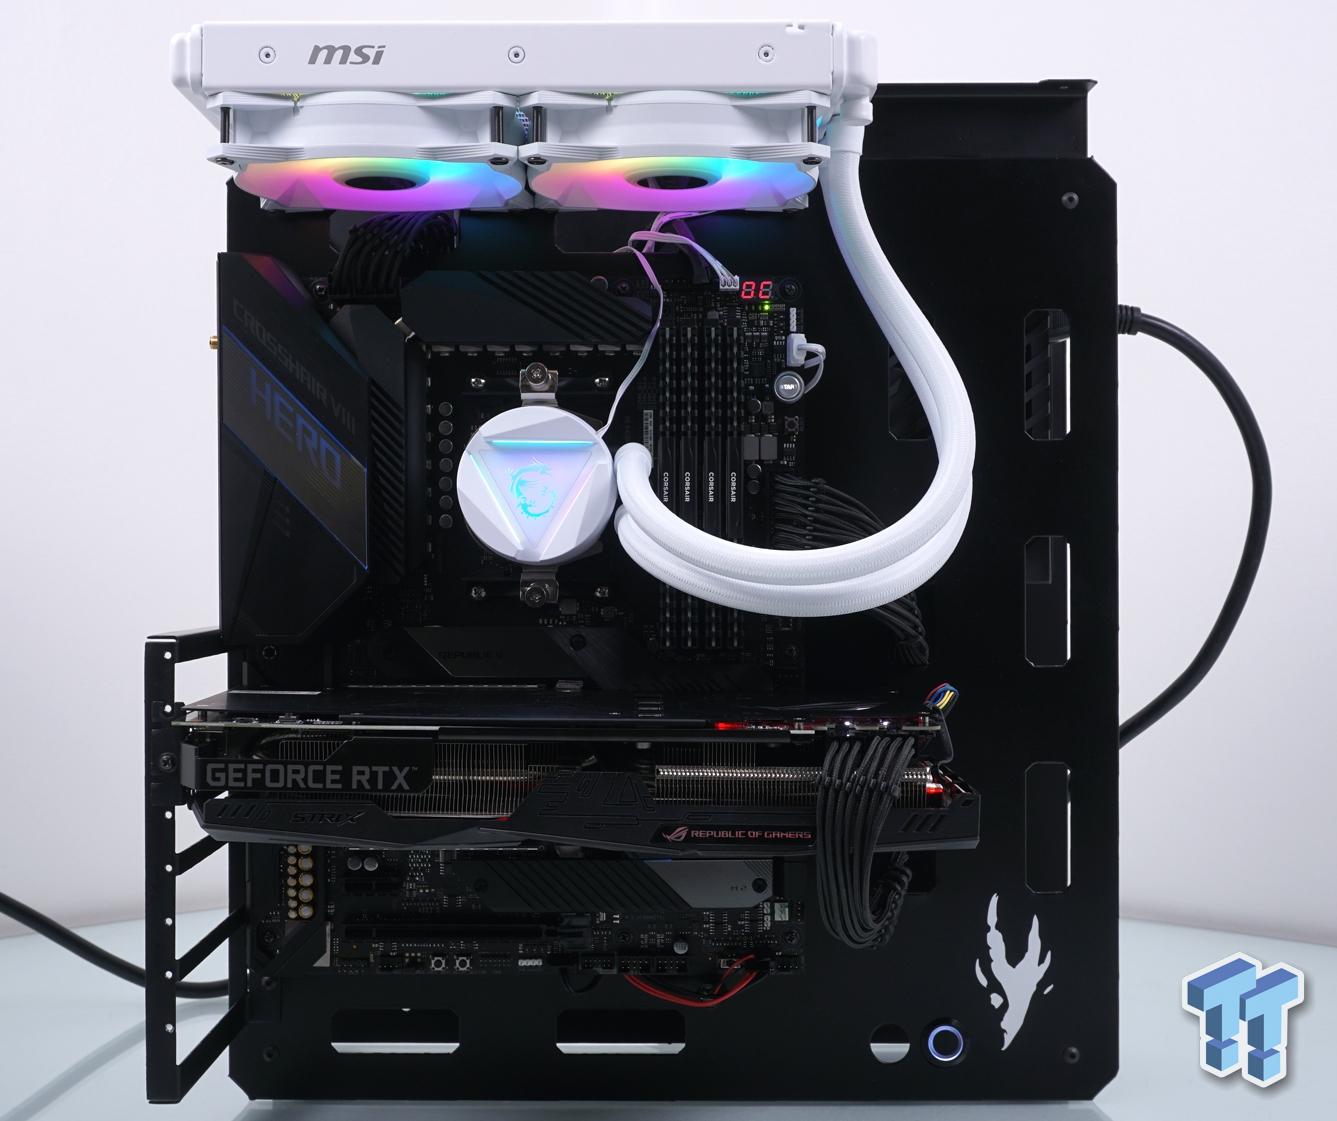 MSI MAG CoreLiquid 240R - the first compact water cooling system from MSI  under test